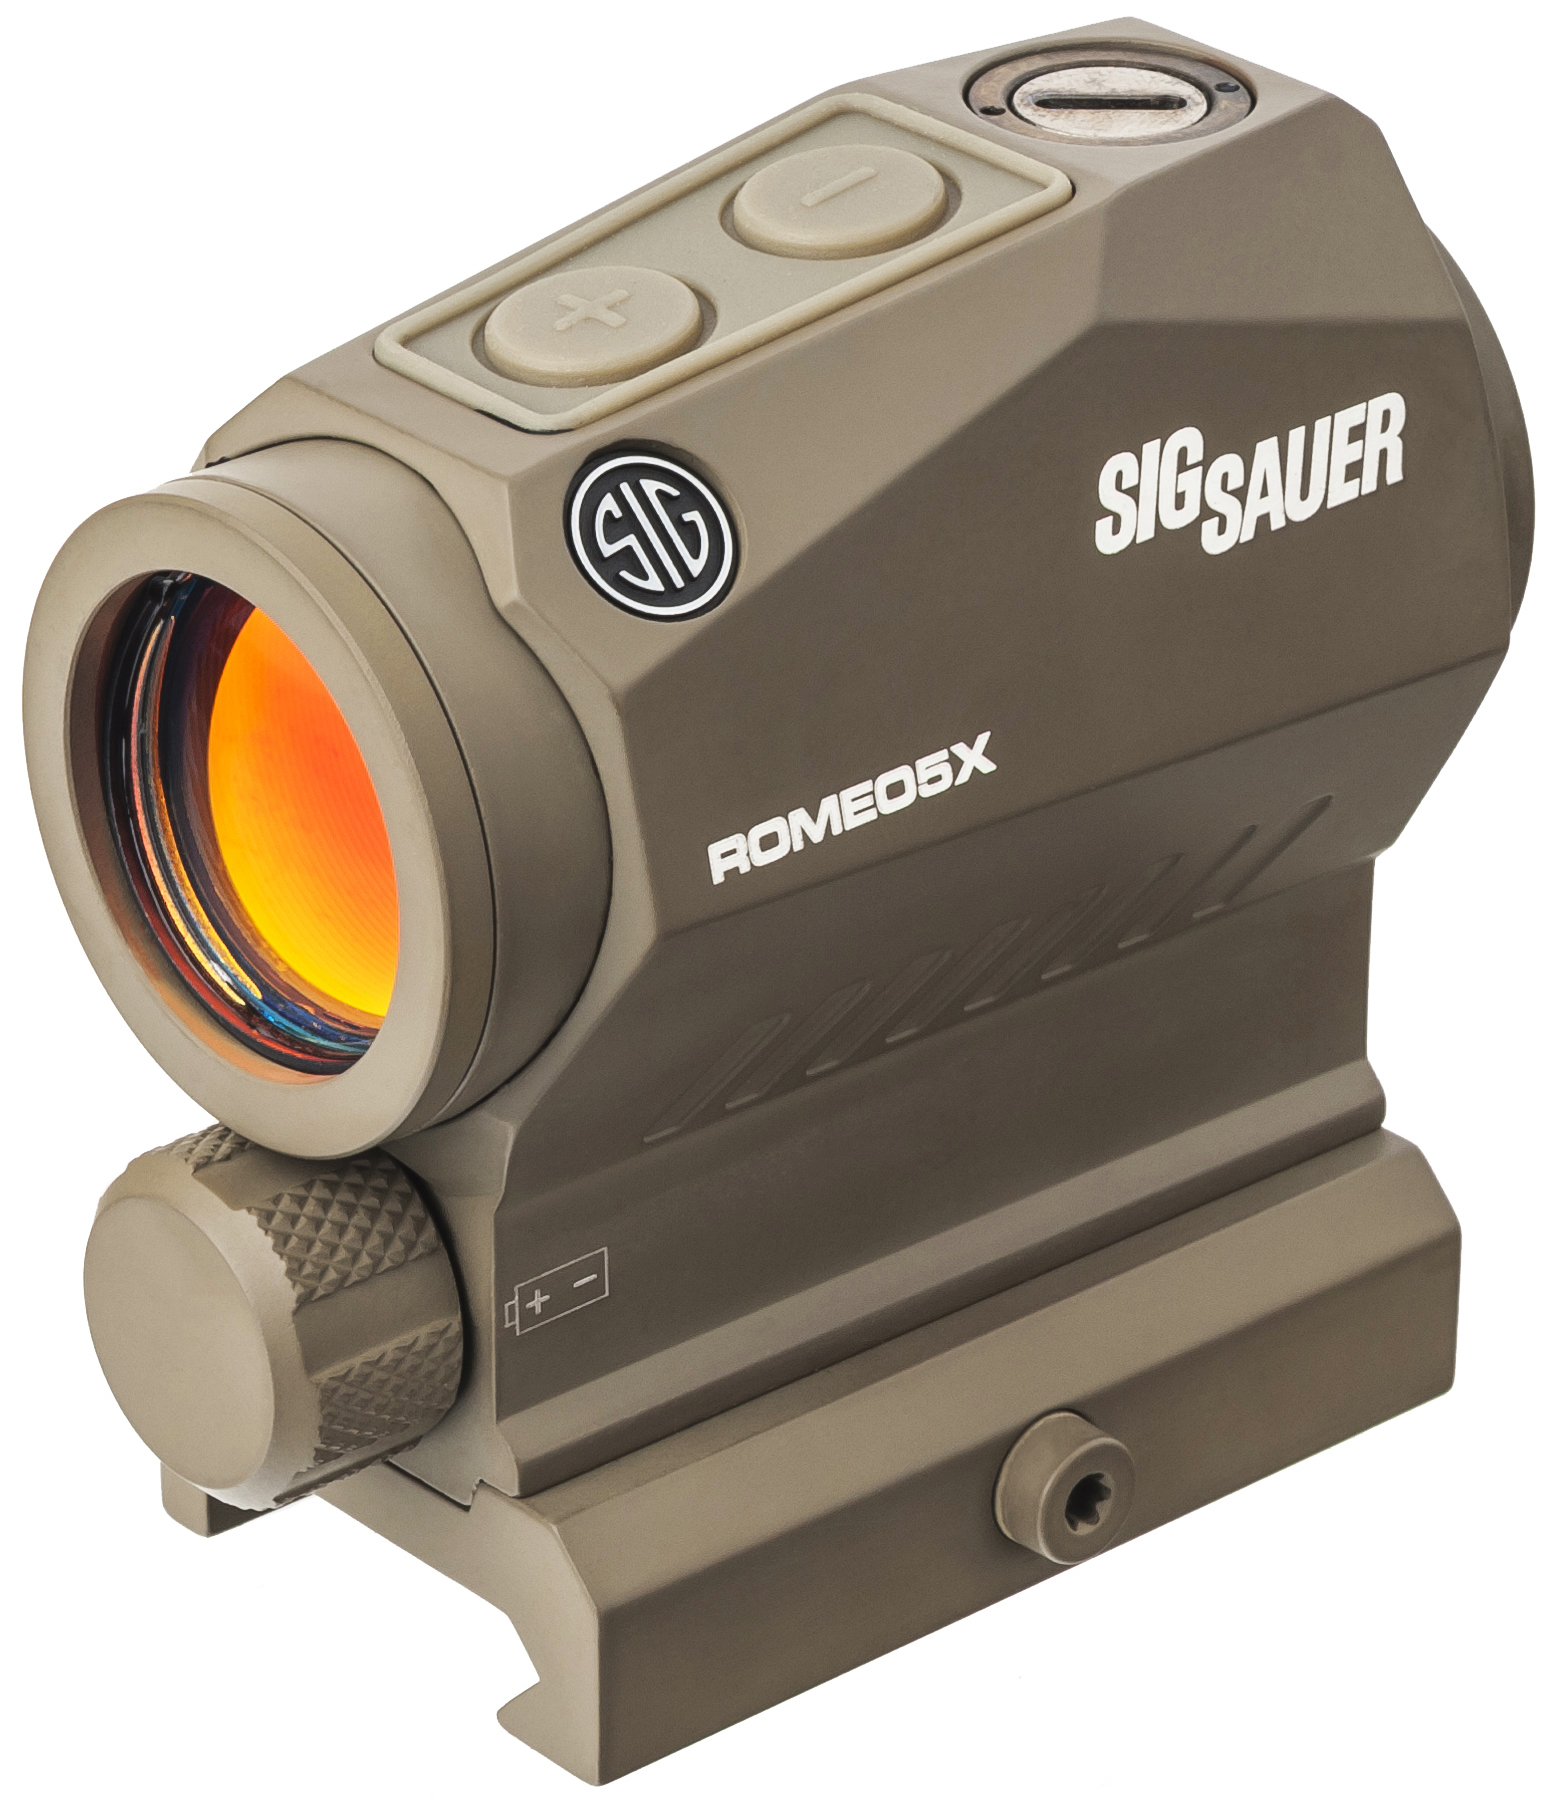 Additional Batteries and Lens Cleaning Cloth Sig Sauer Romeo-MSR 1x20mm 2 MOA Red Dot Sight FDE 